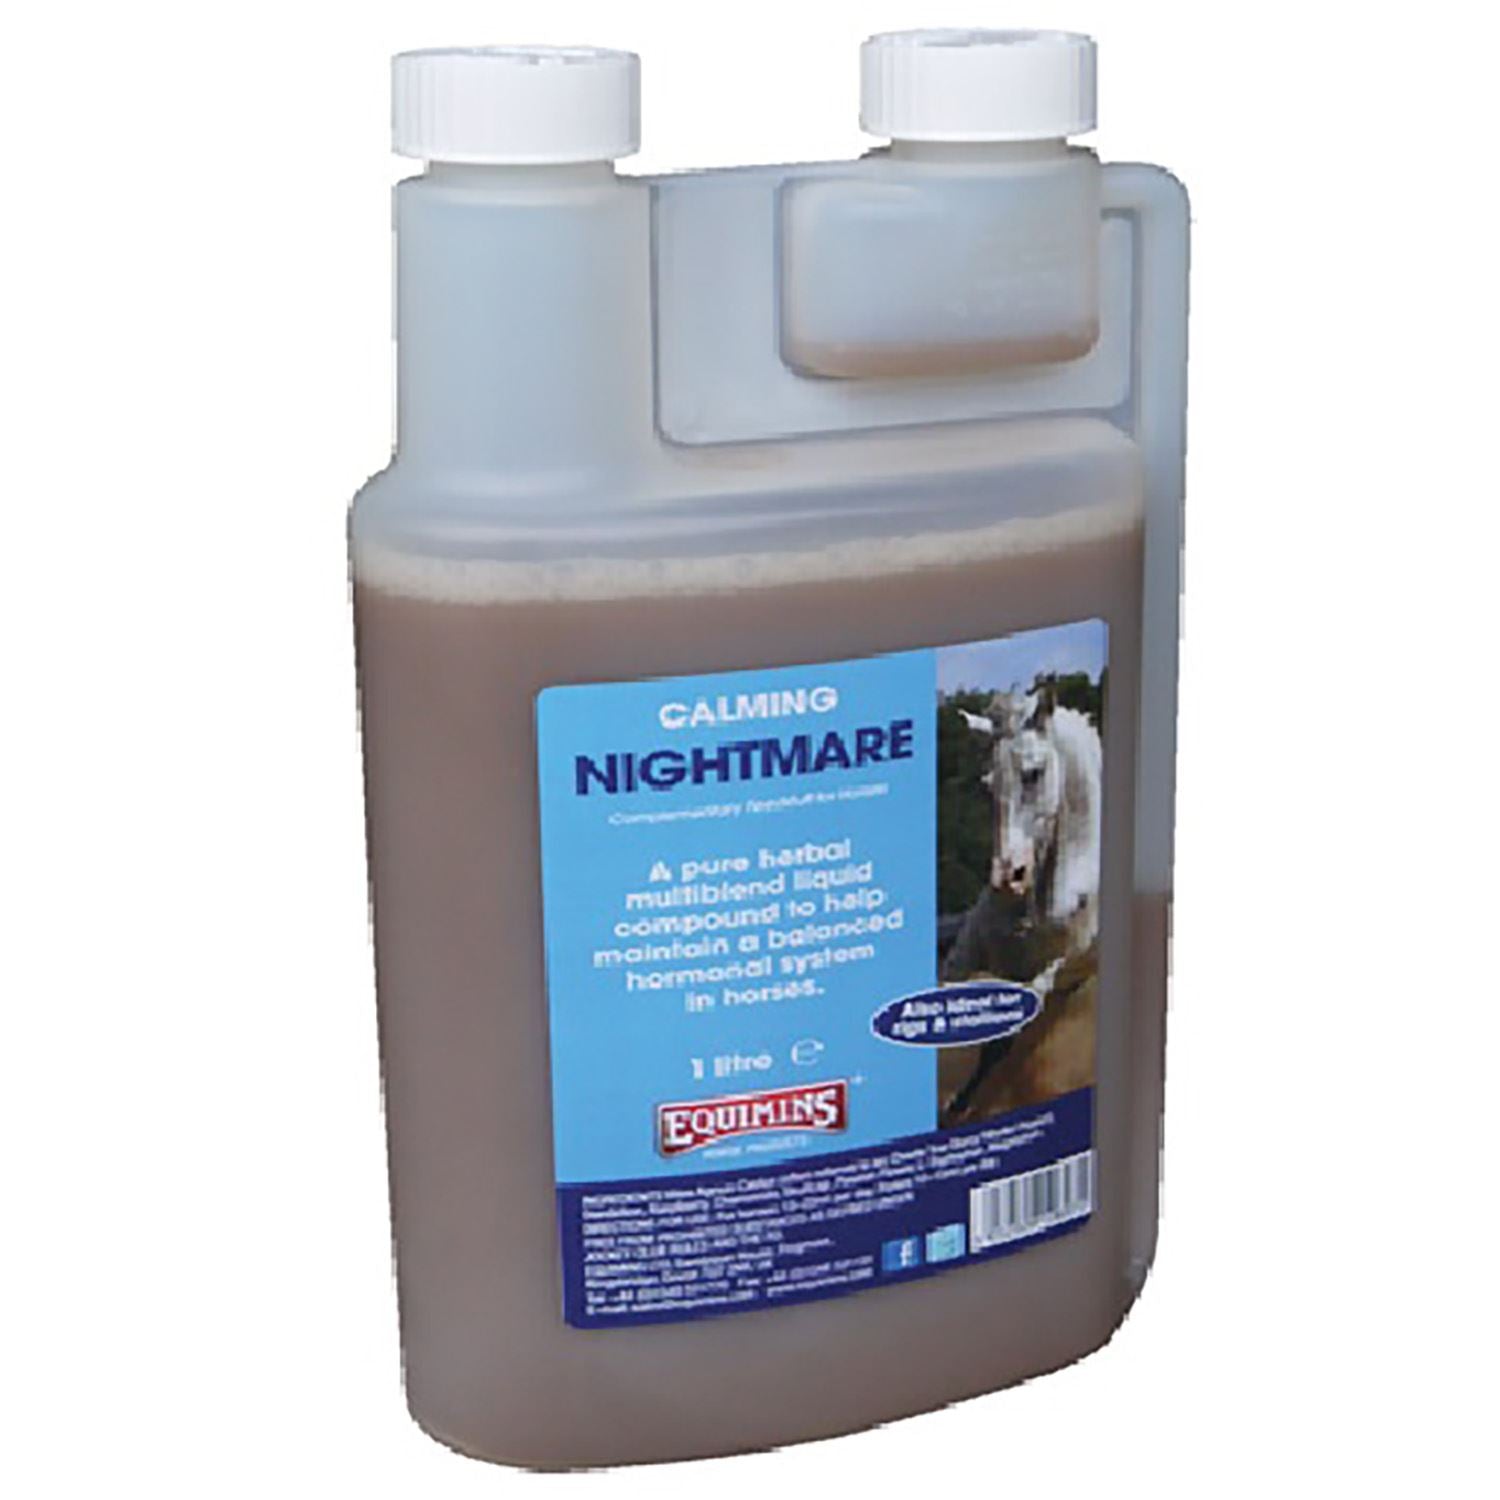 EQUIMINS NIGHTMARE LIQUID for Balanced Hormonal System in Horses